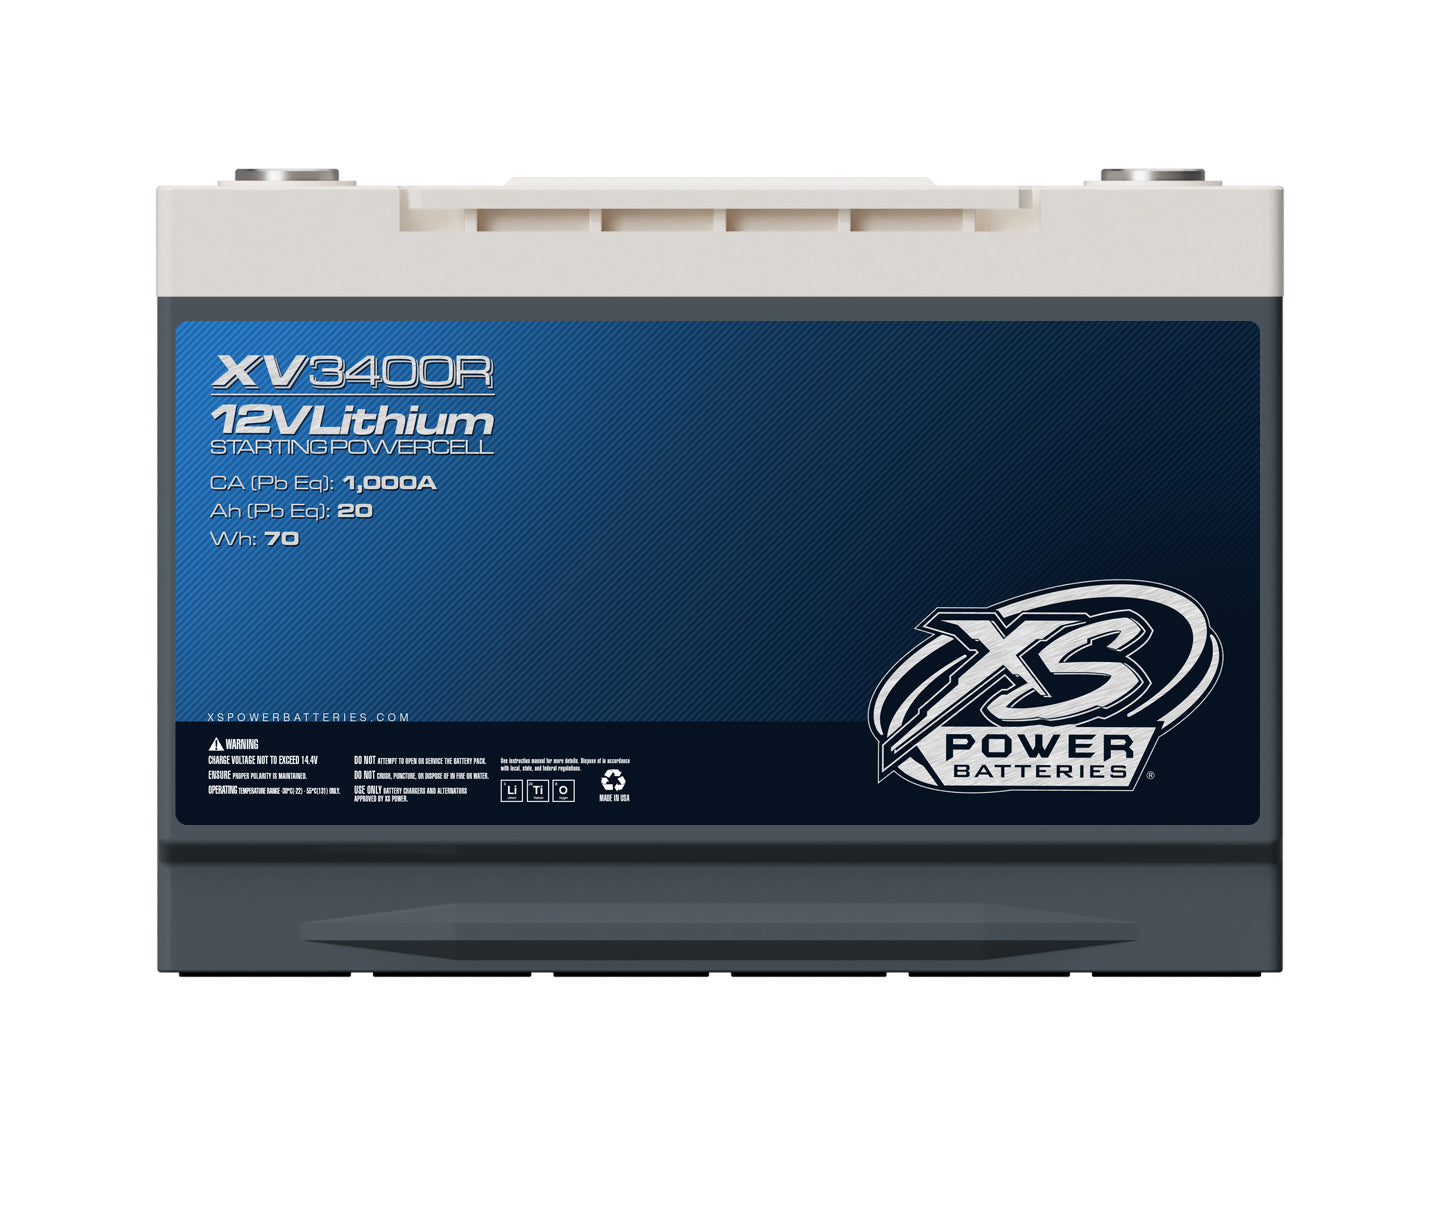 XV3400R XS Power 12VDC Group 34R Lithium LTO Underhood-Safe Vehicle Battery 1500W 70Wh